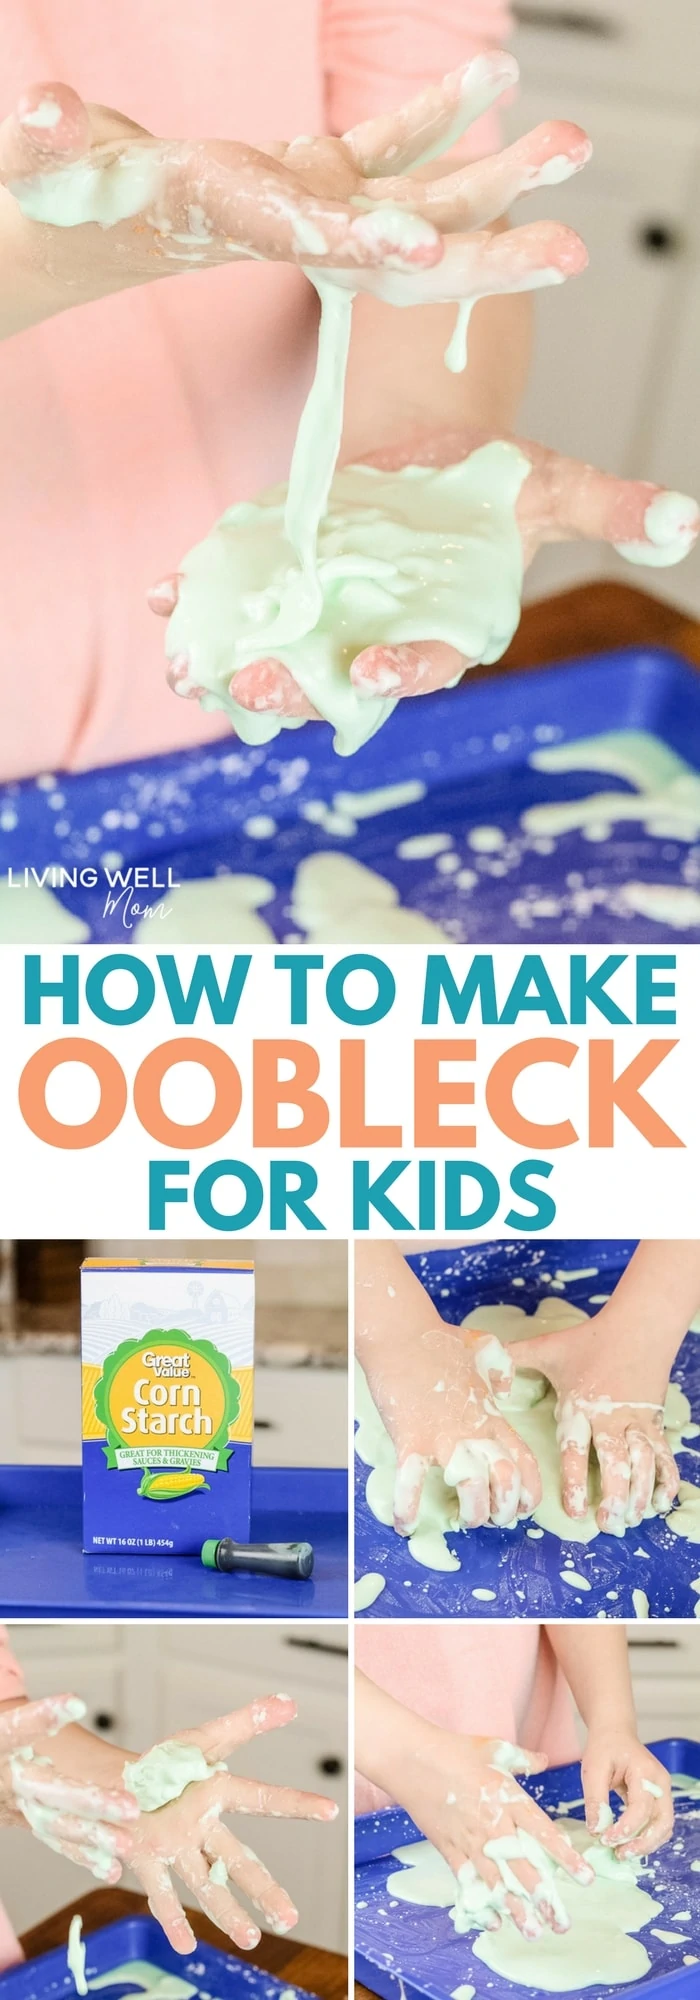 Steps and ingredients on how to make oobleck